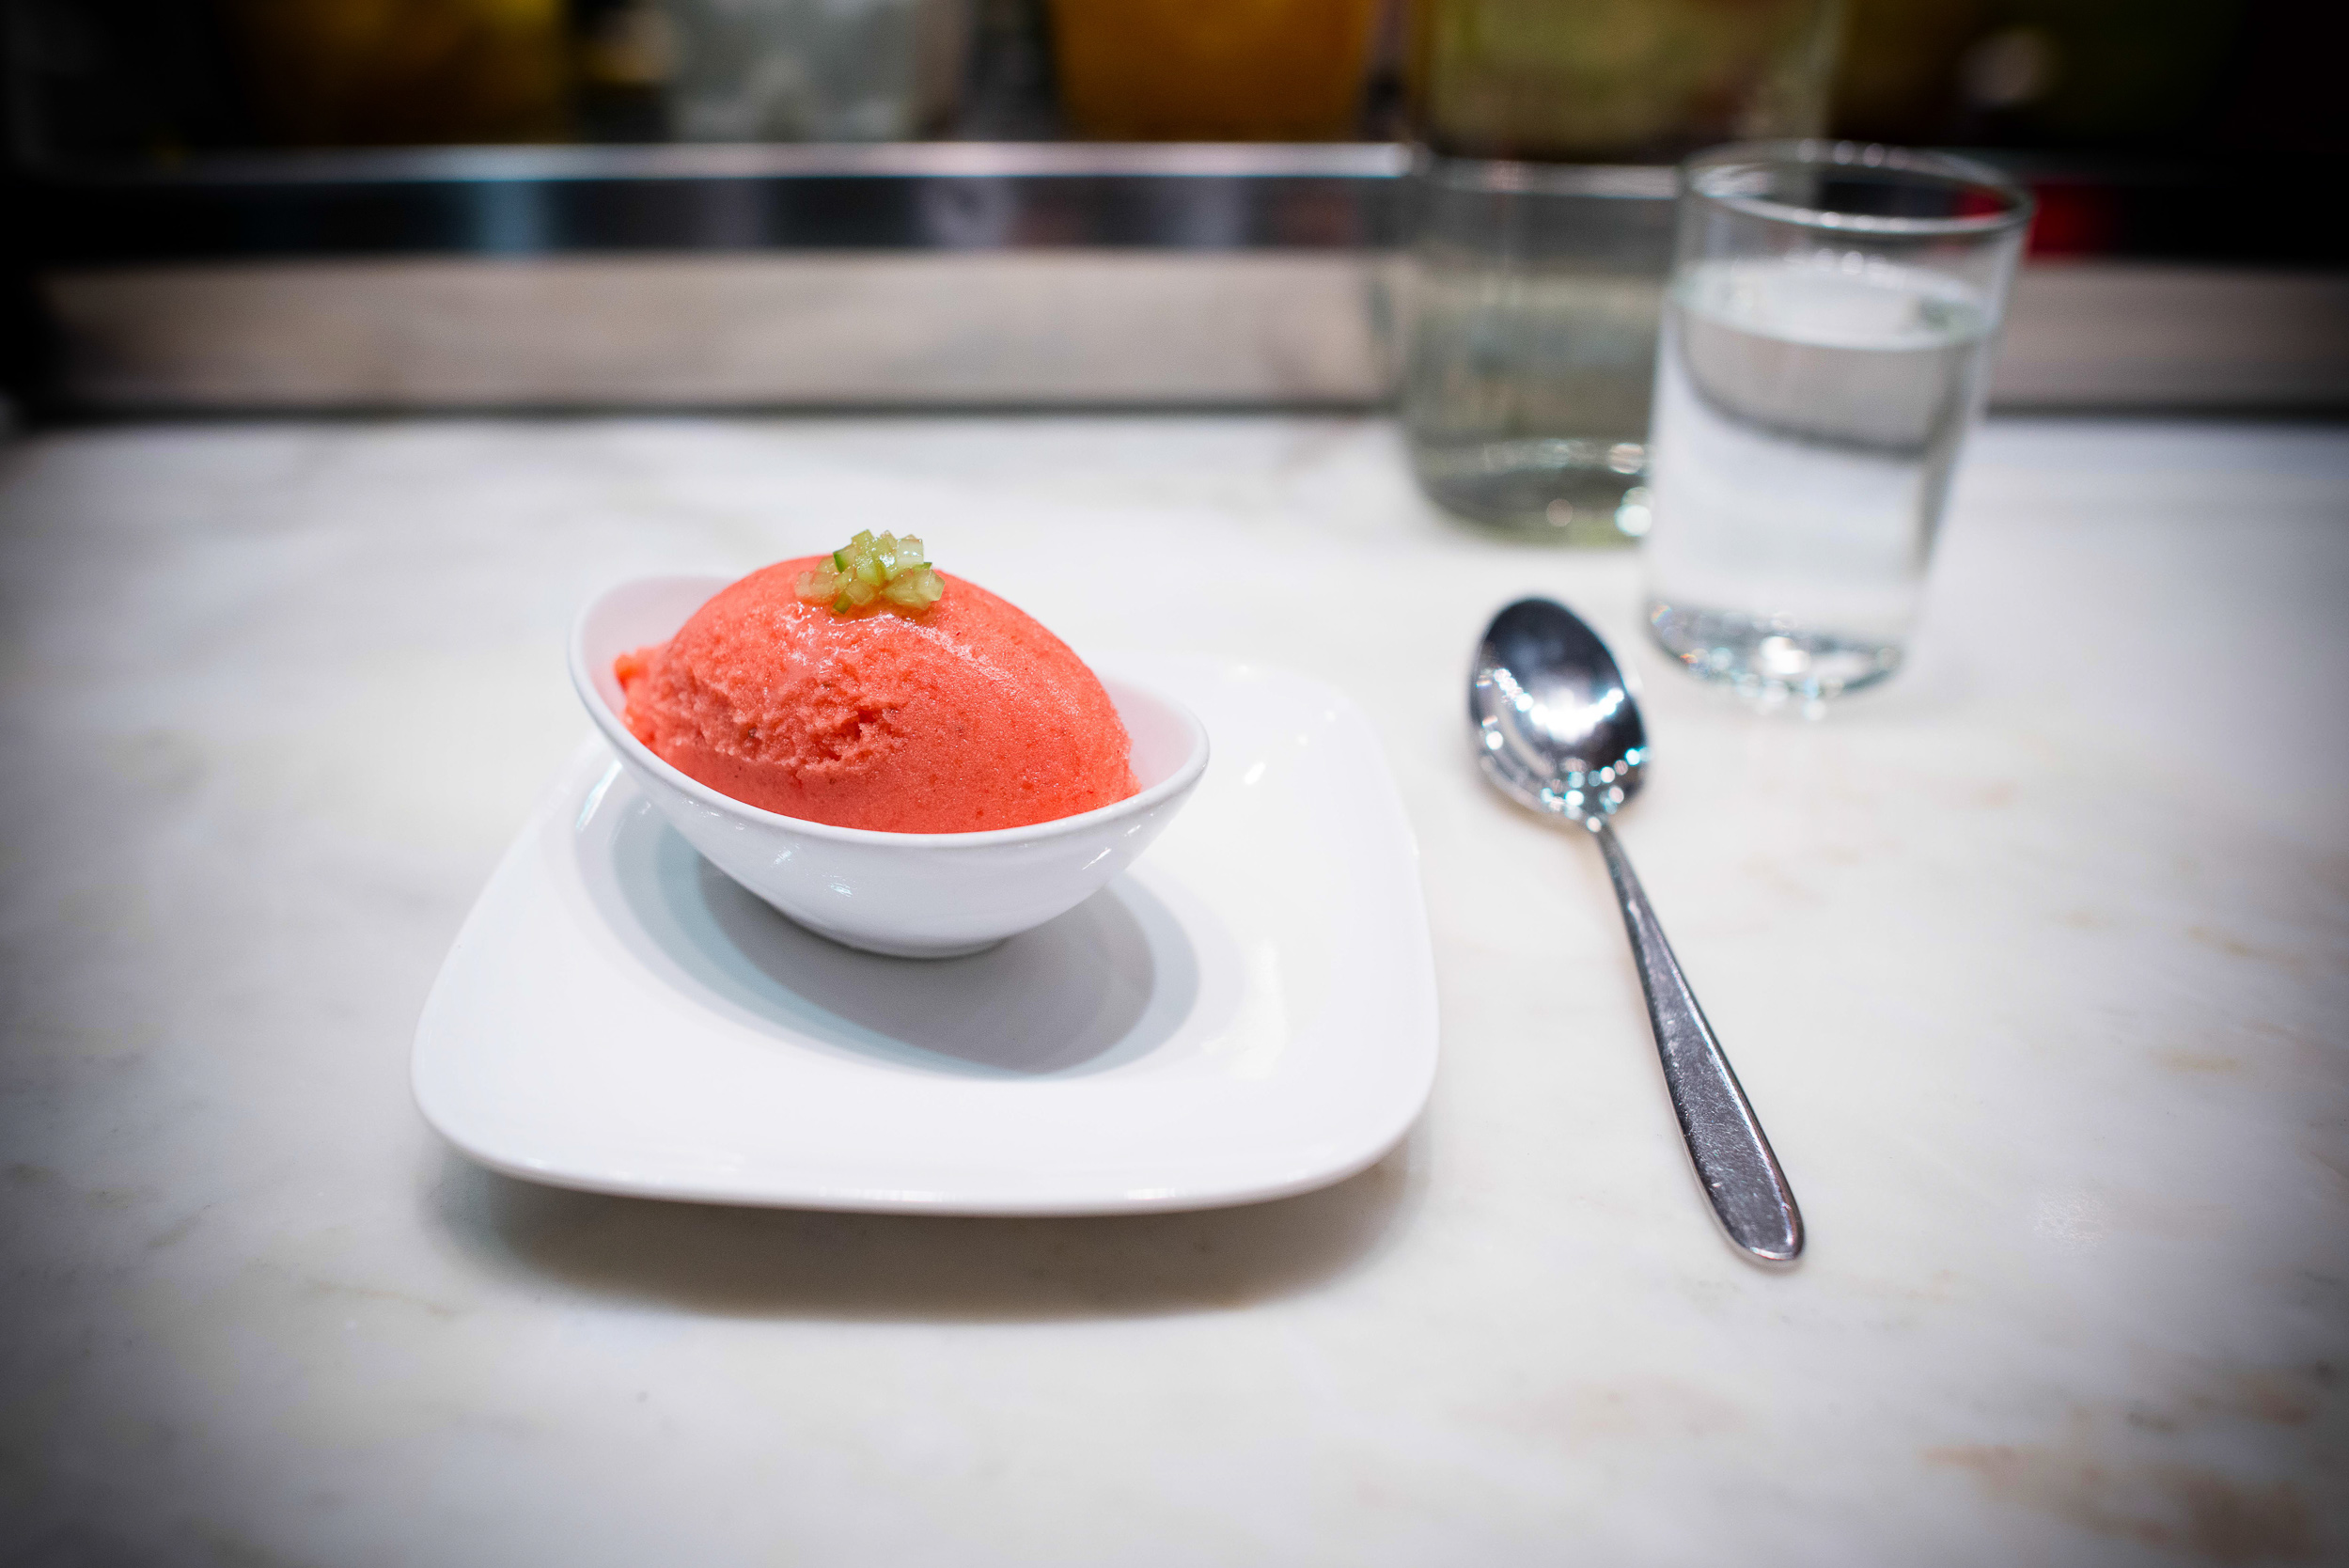 12th Course: Strawberry sorbet